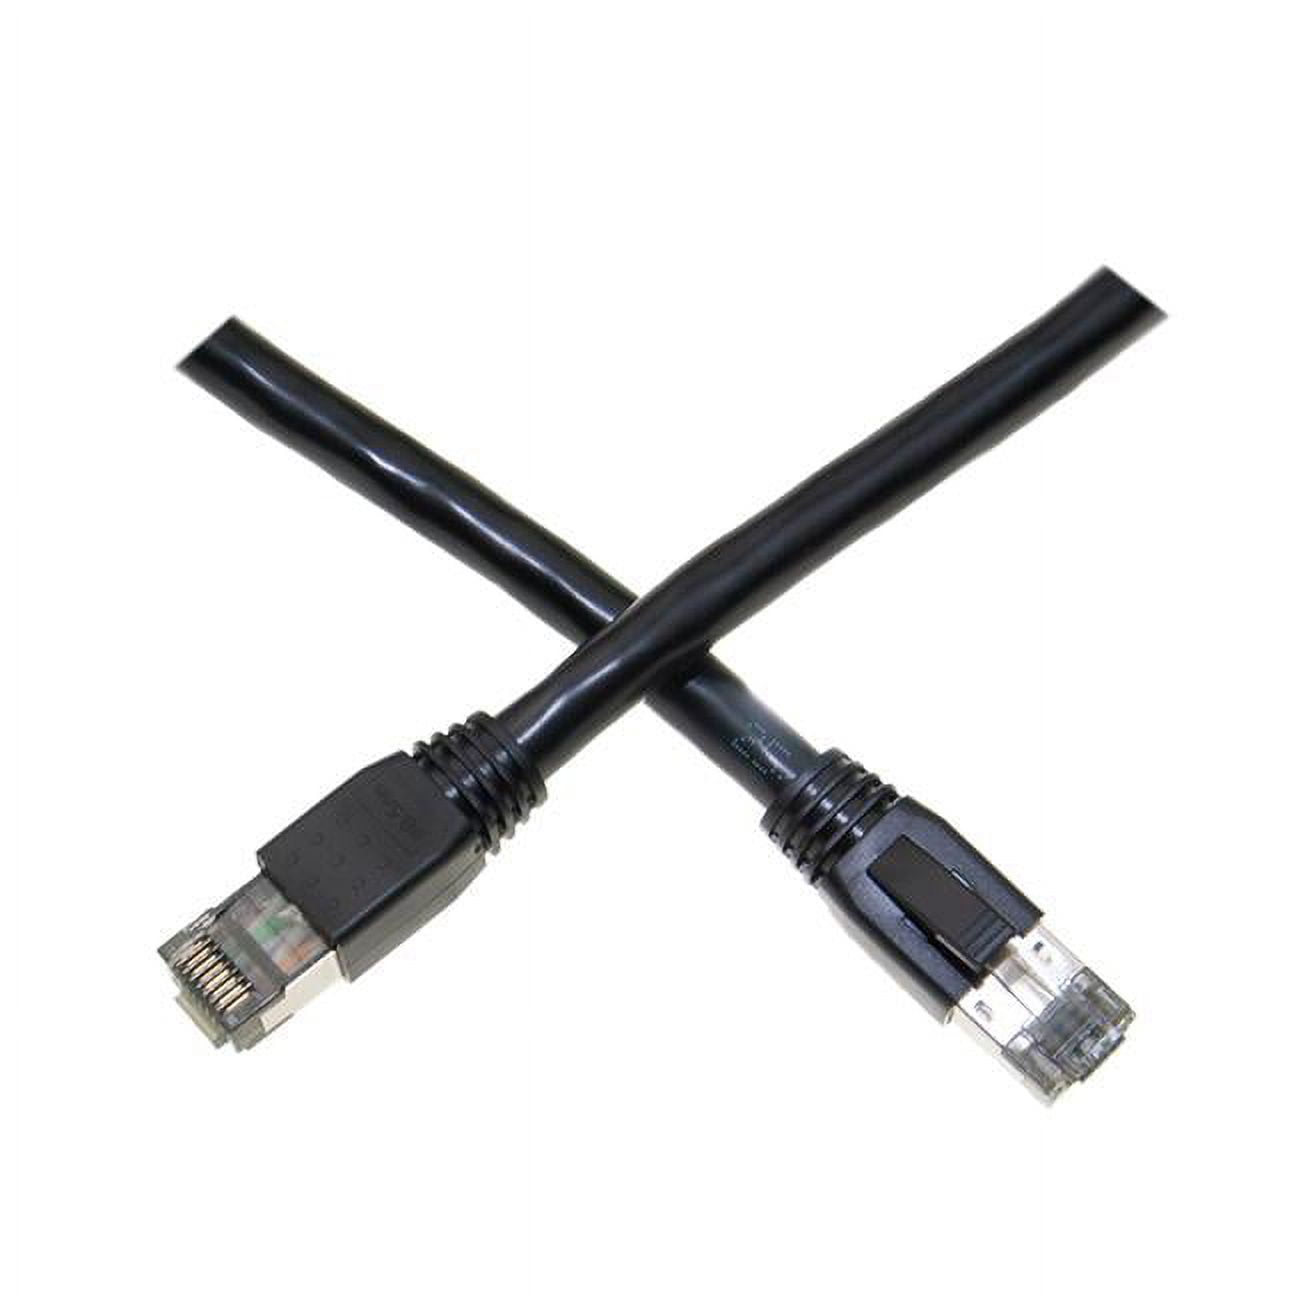 Picture of CableWholesale 13X8-52203 3 ft. Cat8 S-FTP Ethernet Patch Cable, Black - Molded Boot - 40 Gbps - 2000MHz, 4-Pair - 24AWG Stranded Pure Copper - RJ45 Male